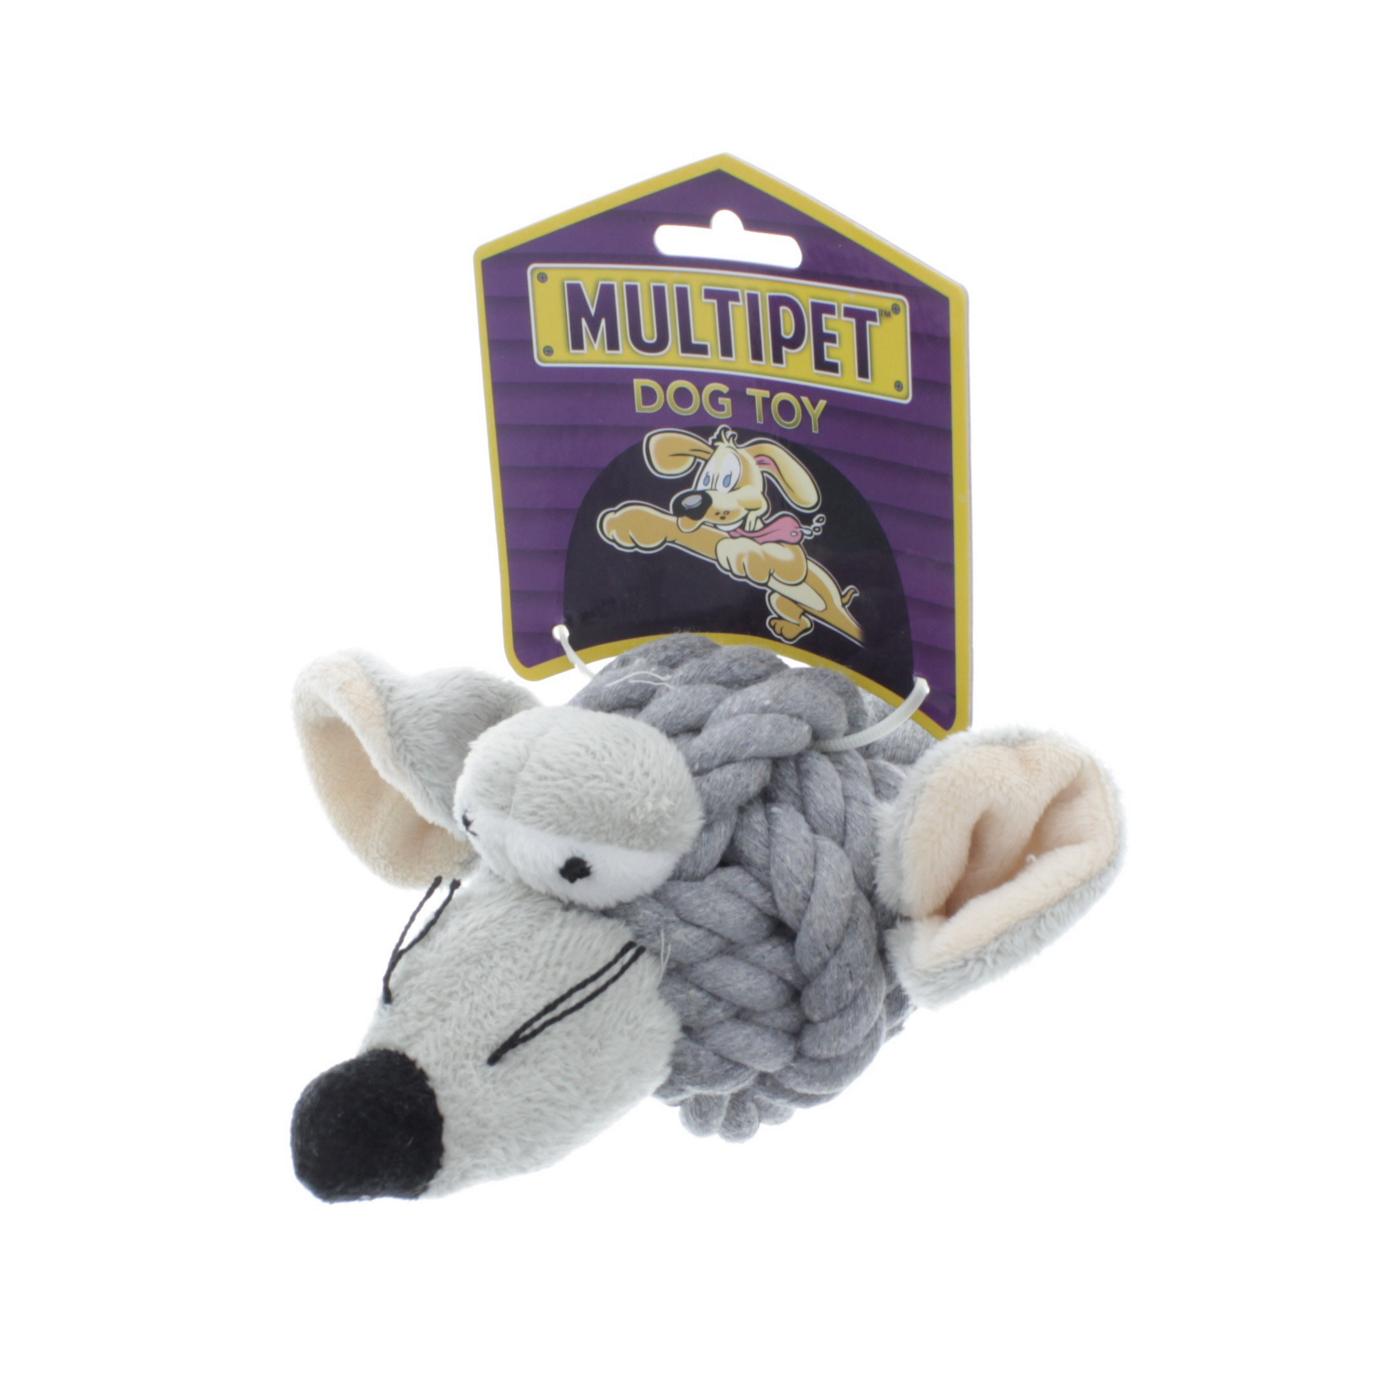 Multipet Rope Head Animals 4 Inch Dog Toy, Assorted Colors; image 3 of 3